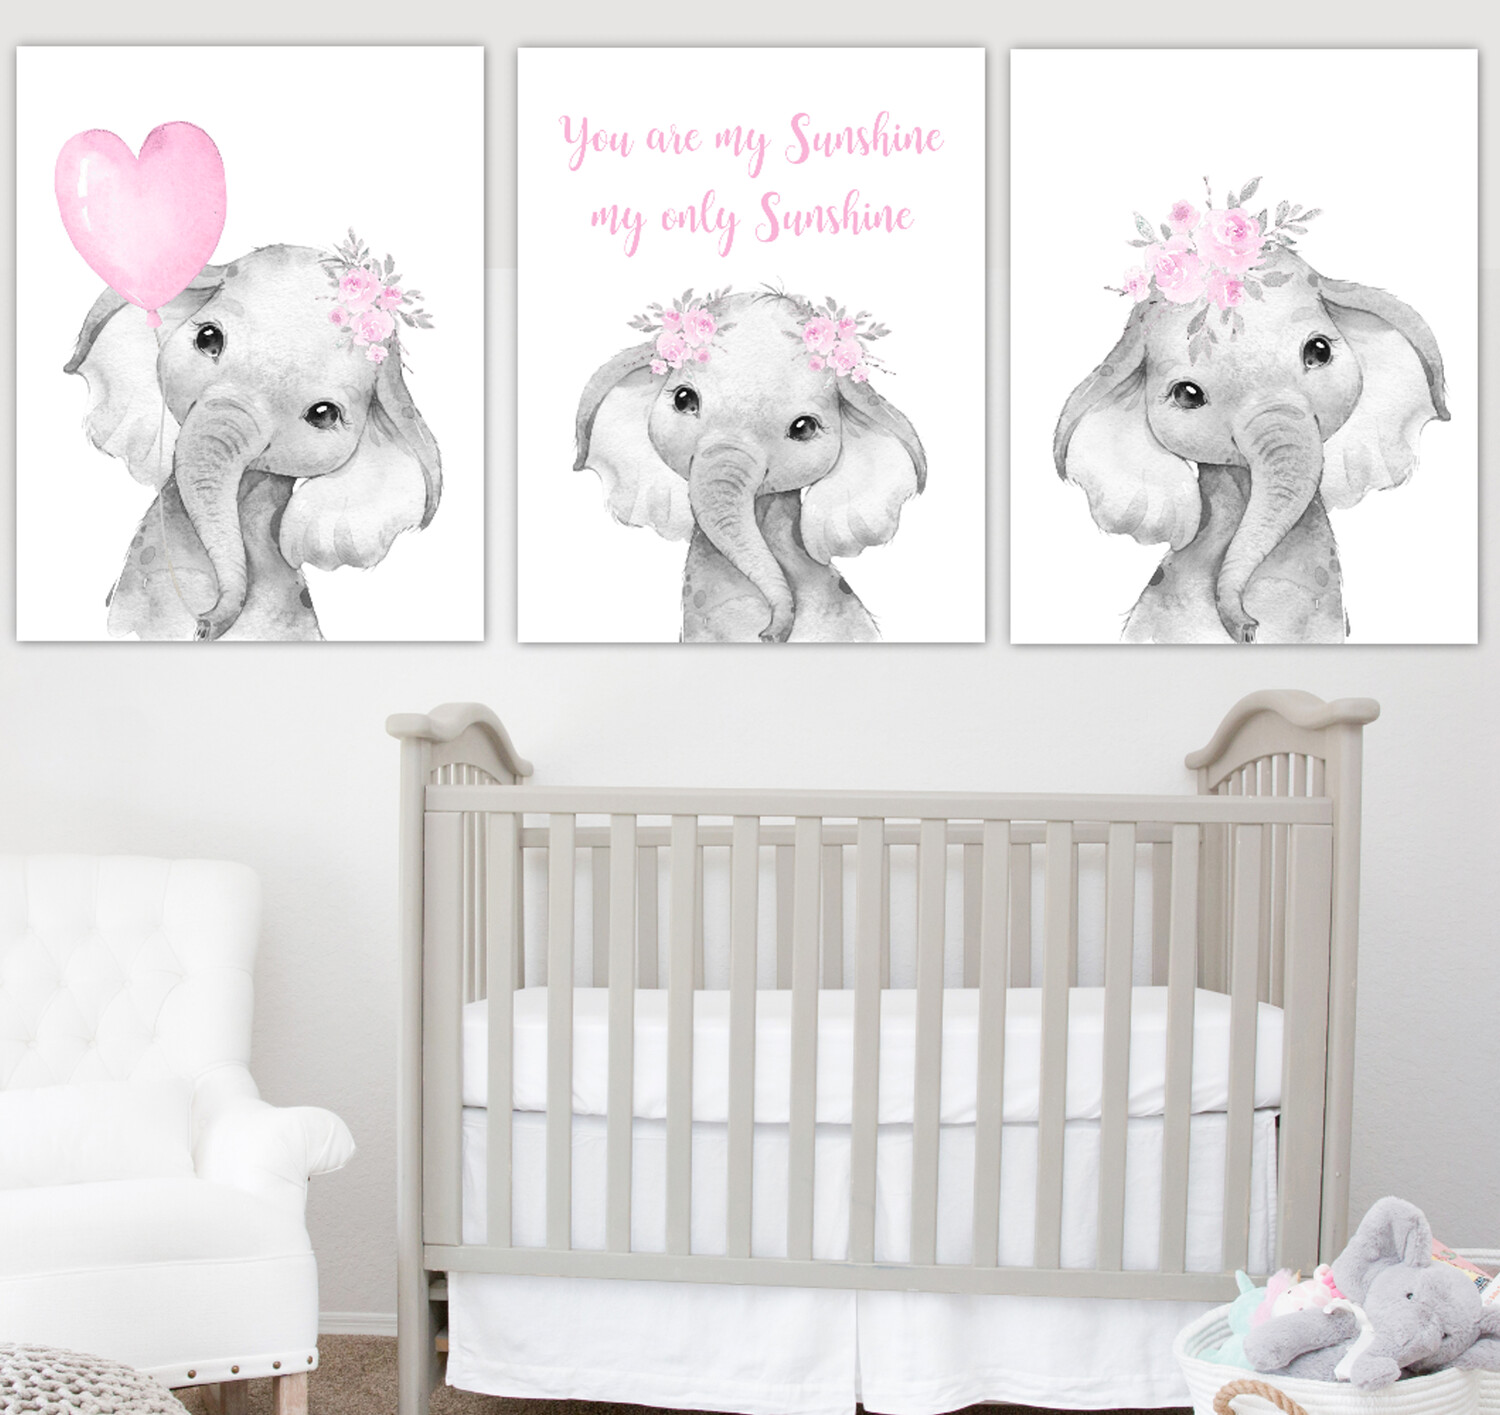 Elephant Wall Decor For Baby Room Pin On Gorgeous Interior Ideas